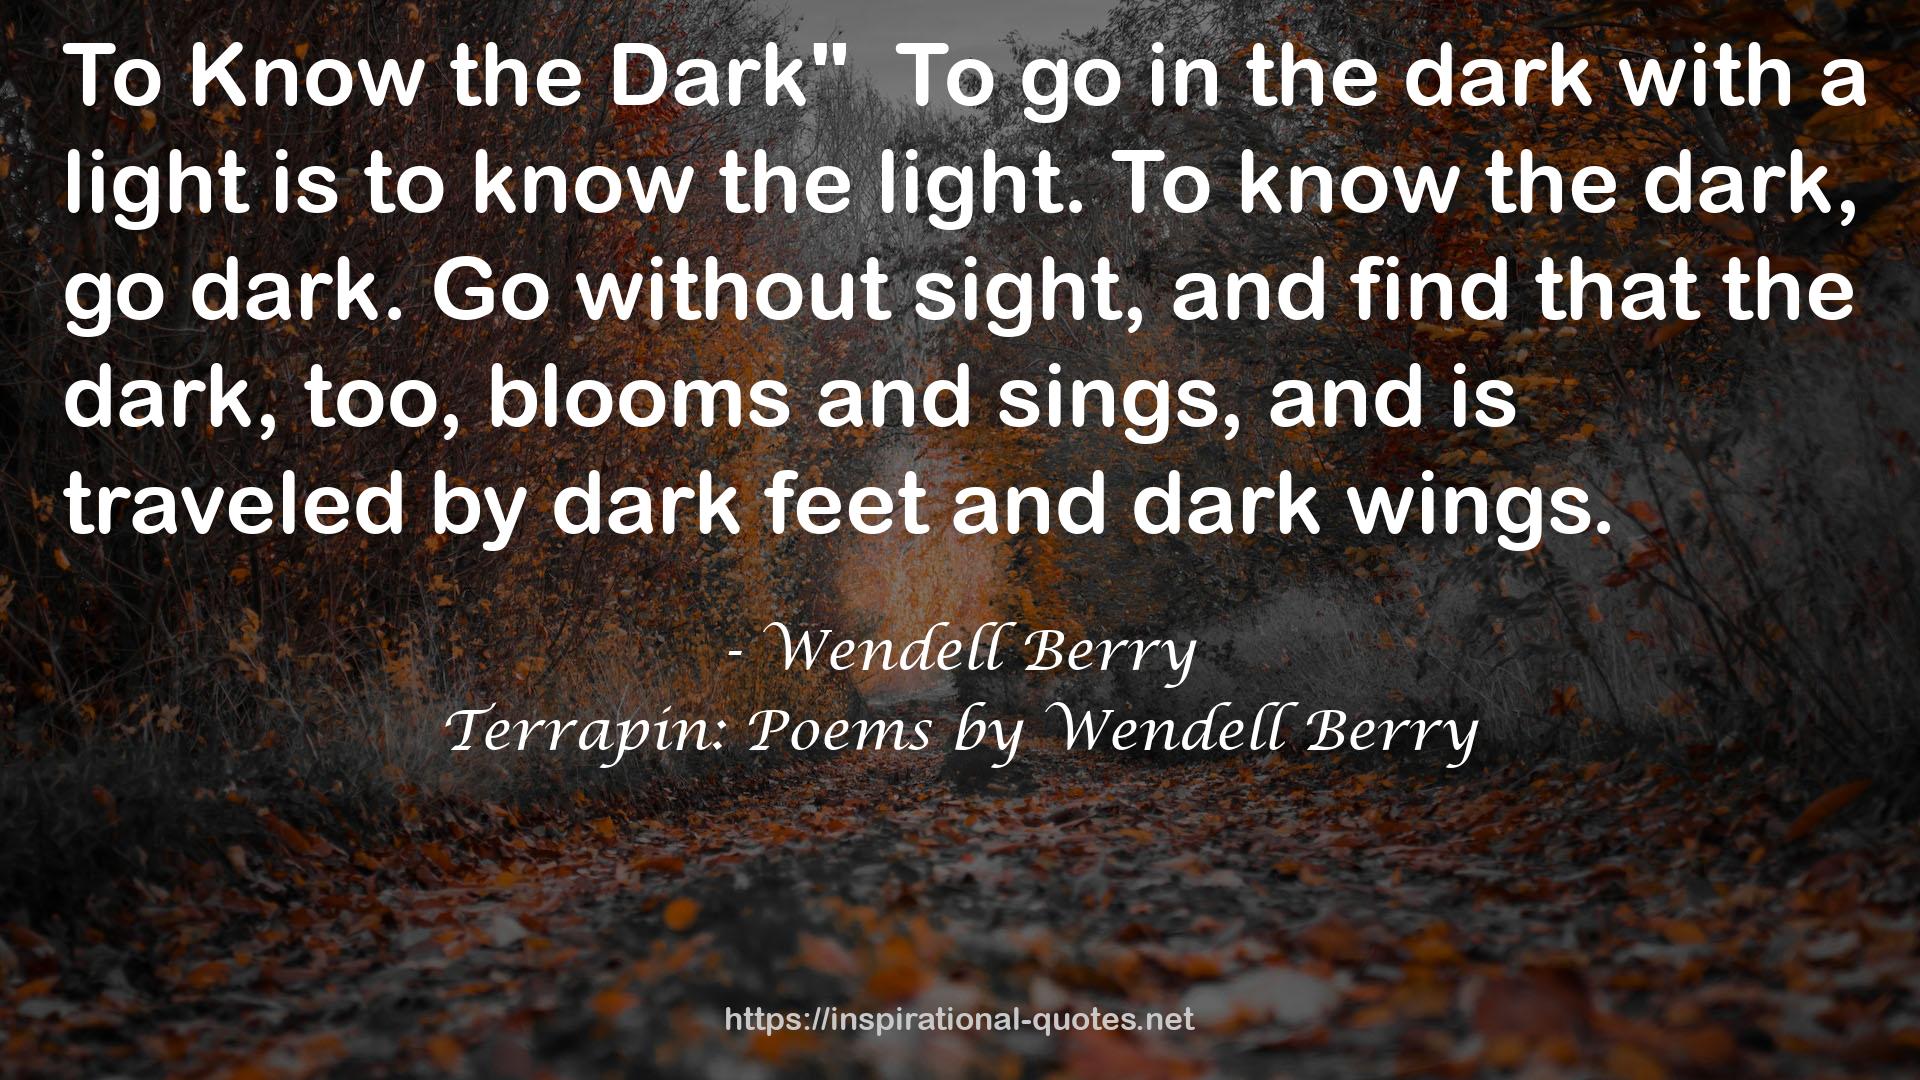 Terrapin: Poems by Wendell Berry QUOTES